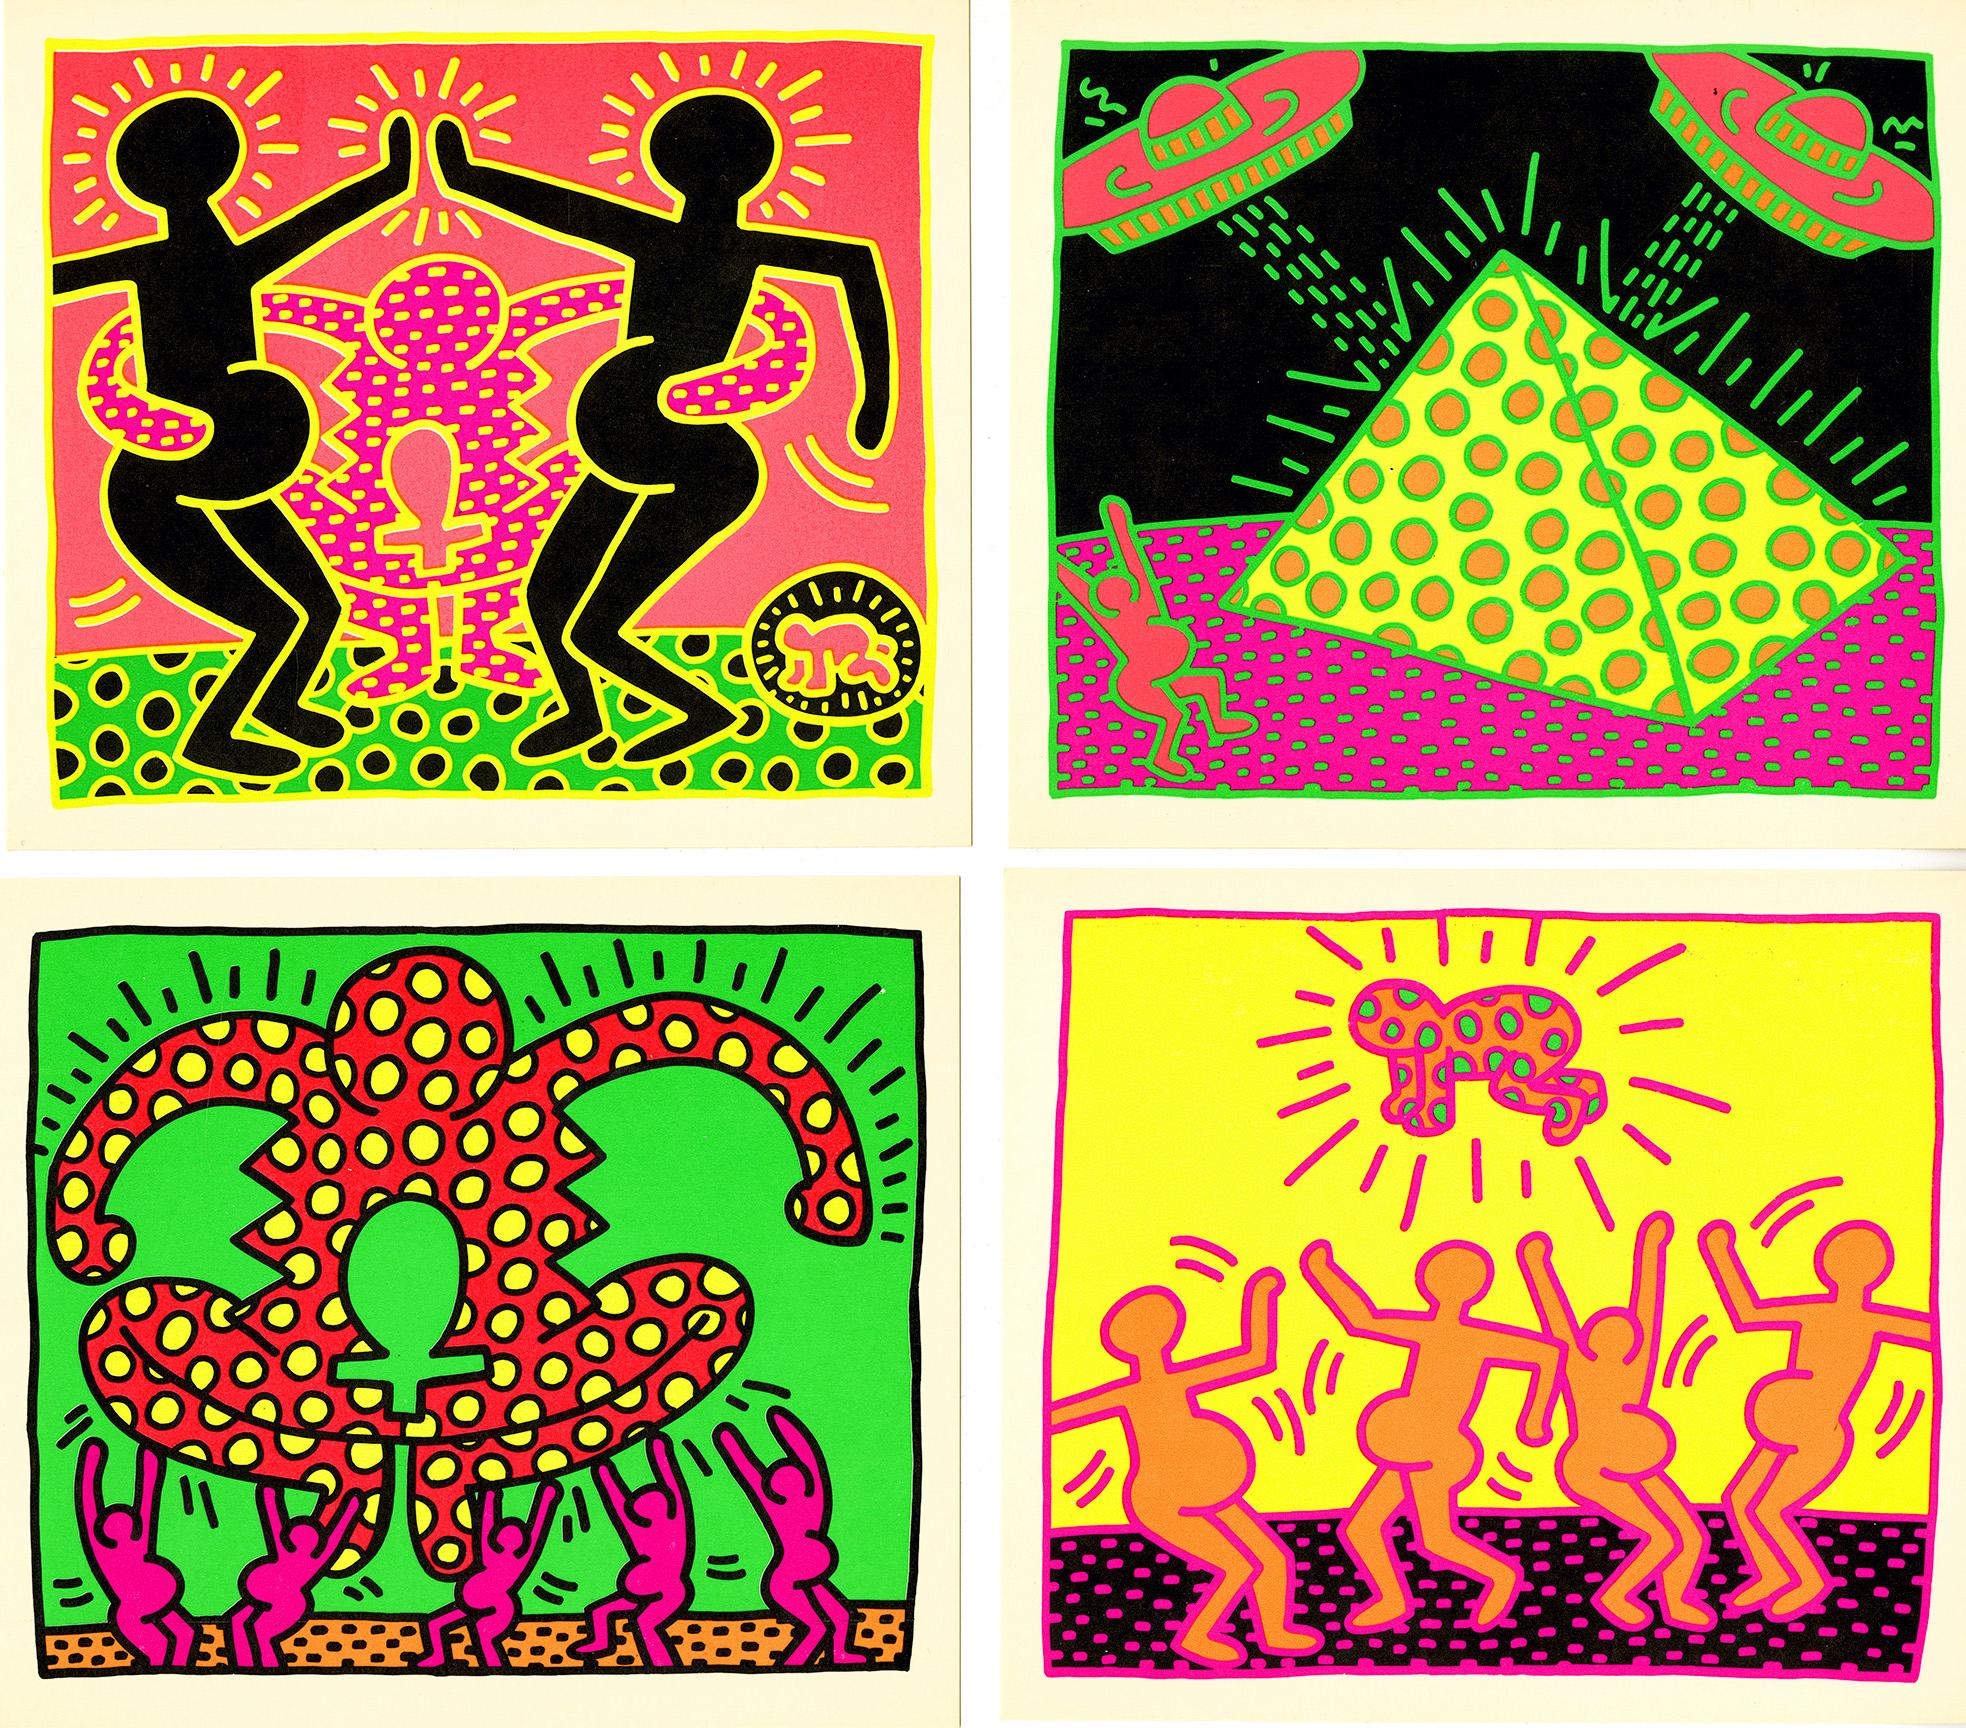 Keith Haring, Tony Shafrazi 1983:
This set of five promotional cards, accompanied by the original Shafrazi invitation card and envelope, was published to promote Keith Haring's soon-to-be-released portfolio of 5 screen-prints, “The Fertility Suite."